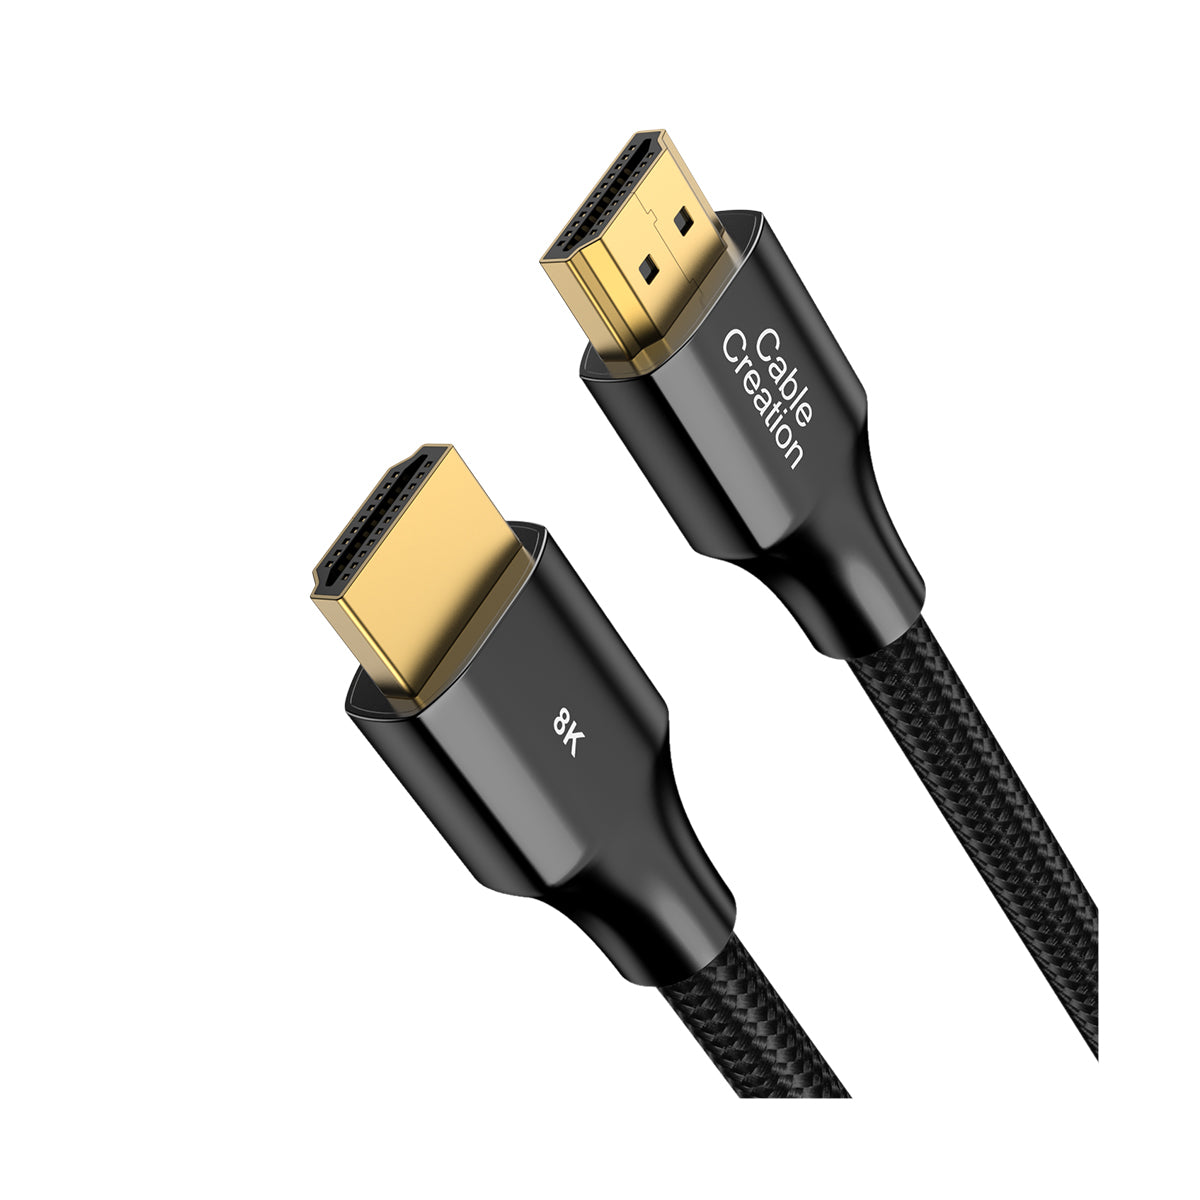 Certified Ultra HD HDMI 8K Cable Zinc Alloy Shell